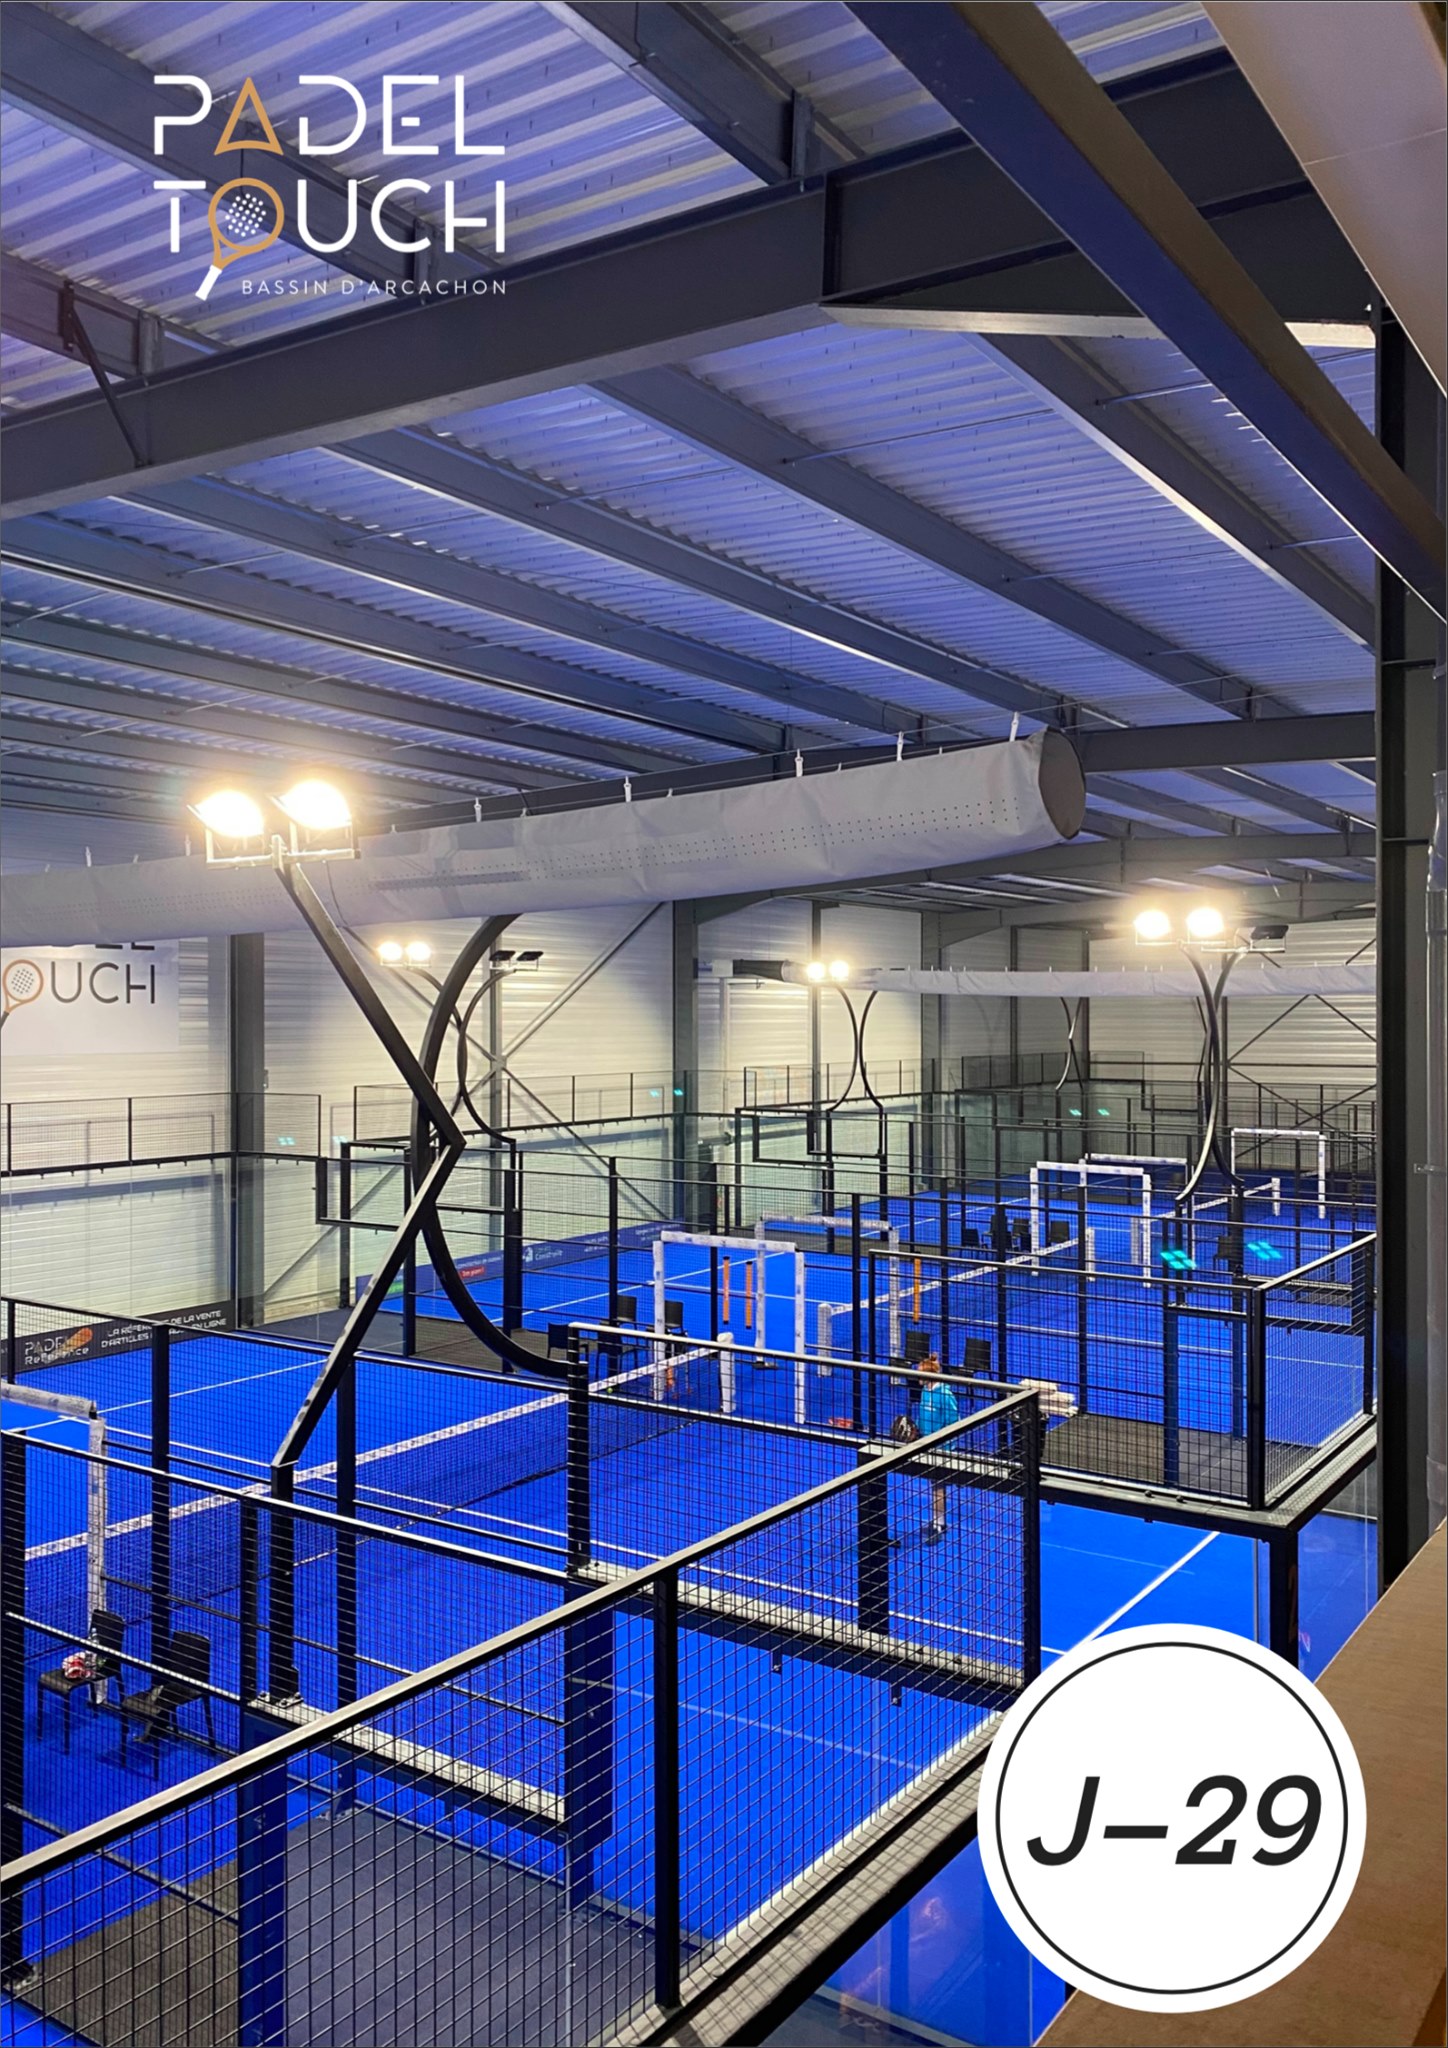 Padel Touch zet de airconditioning centraal!